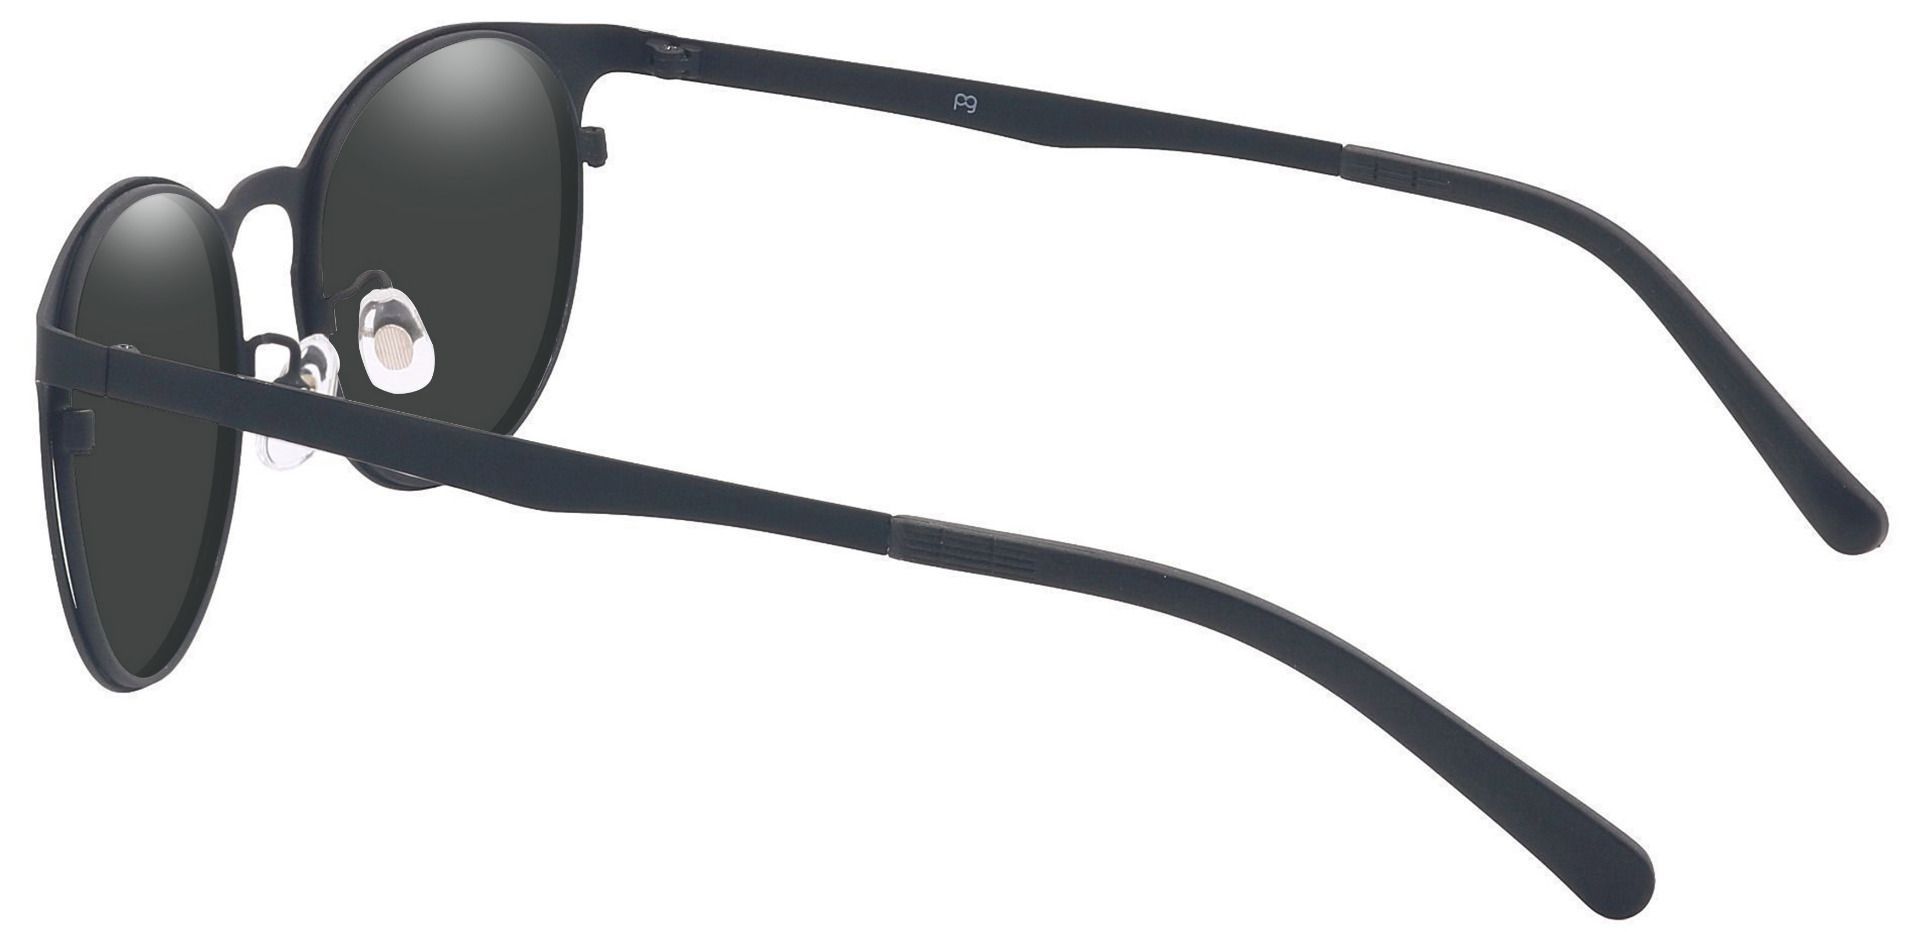 Wallace Oval Non-Rx Sunglasses - Black Frame With Gray Lenses